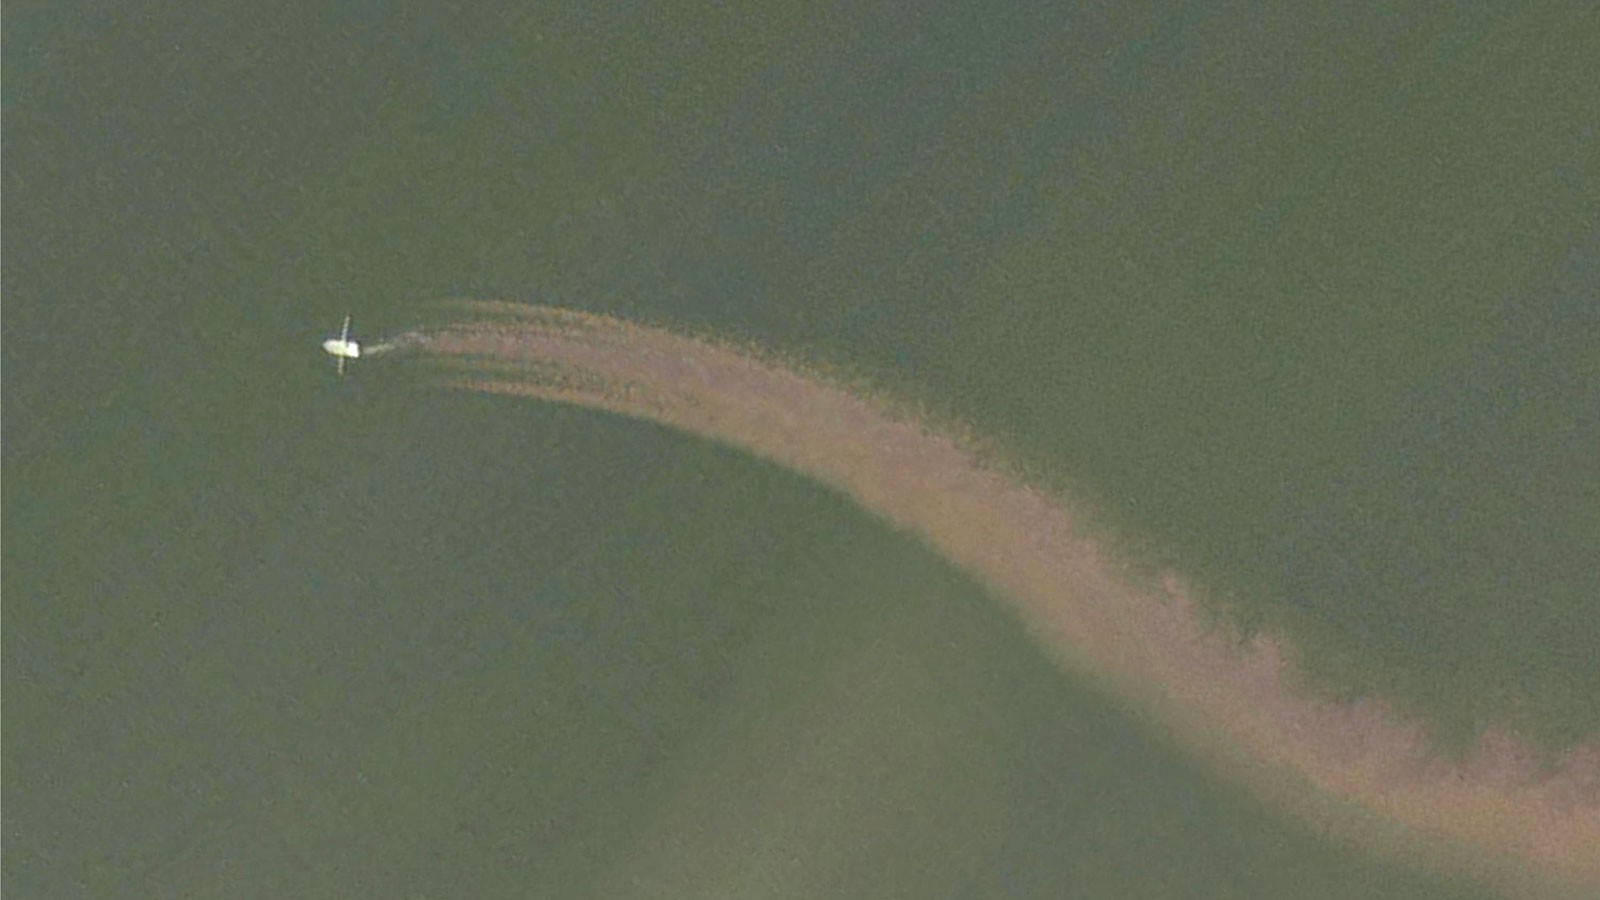 A satellite image showing a twin-rigged shrimp trawler in the northern Gulf of Mexico raising a plume of sediment off the seafloor.